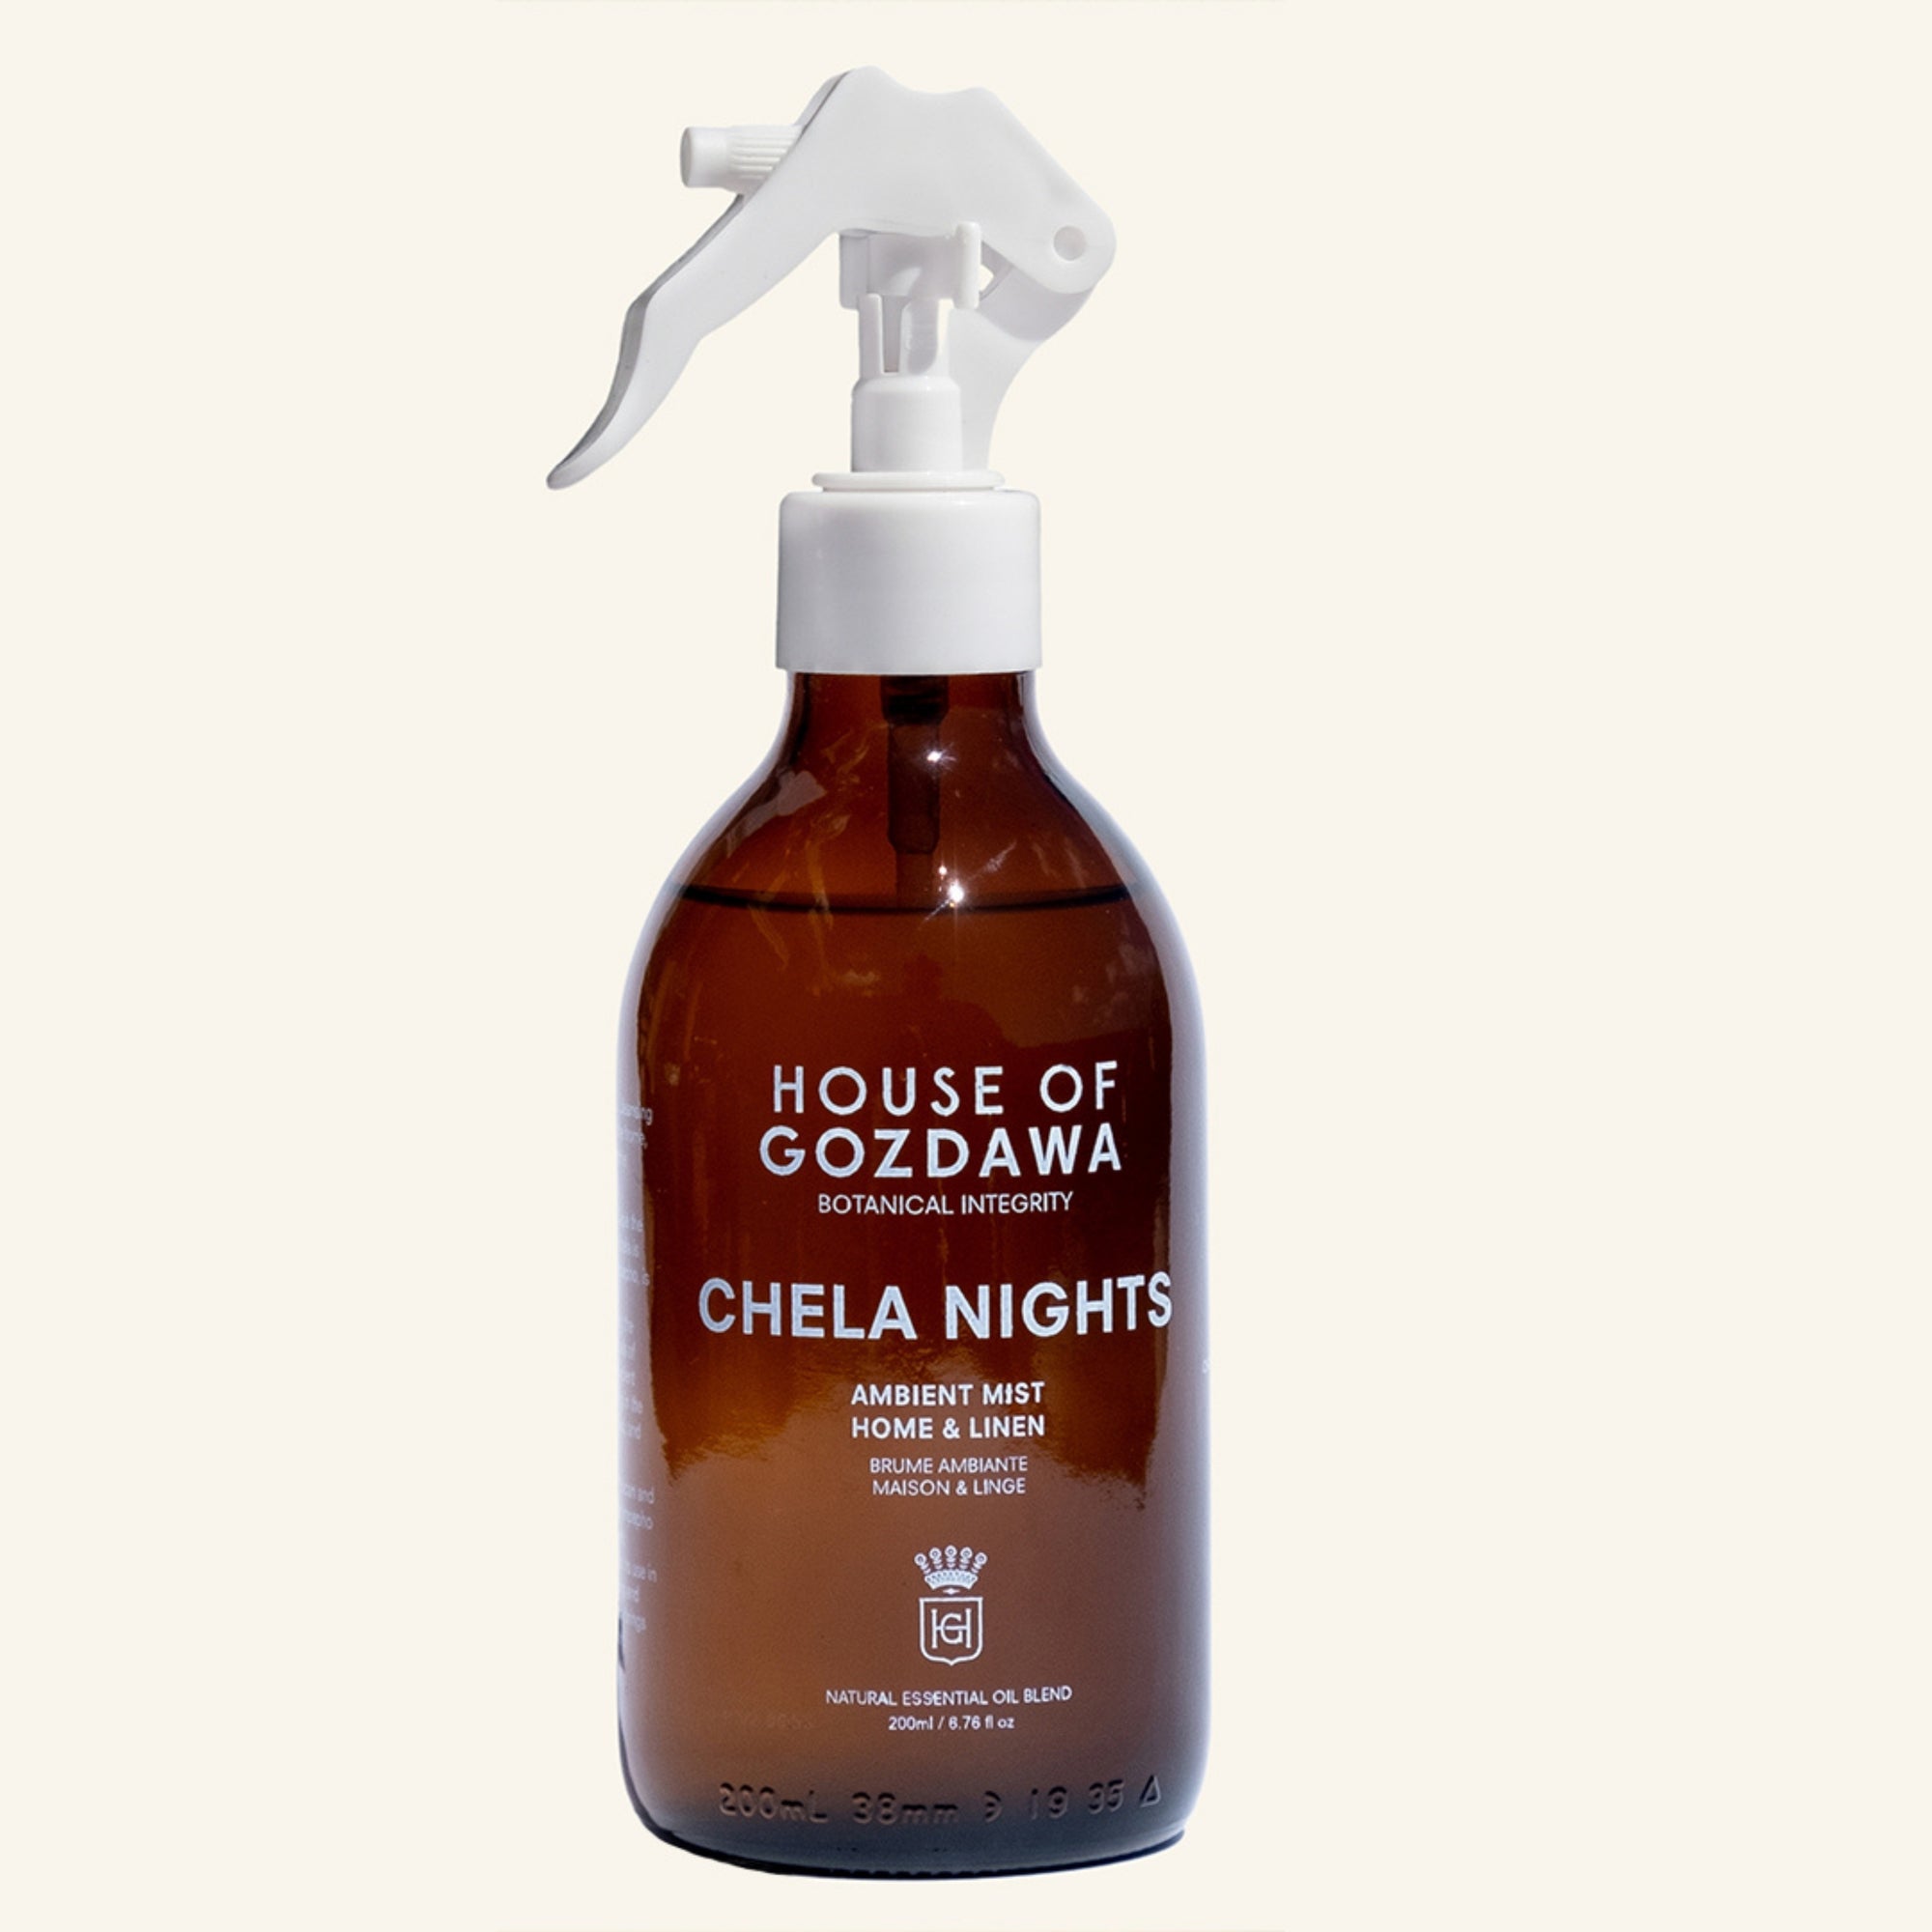 Chela nights ambient mist - home and linen